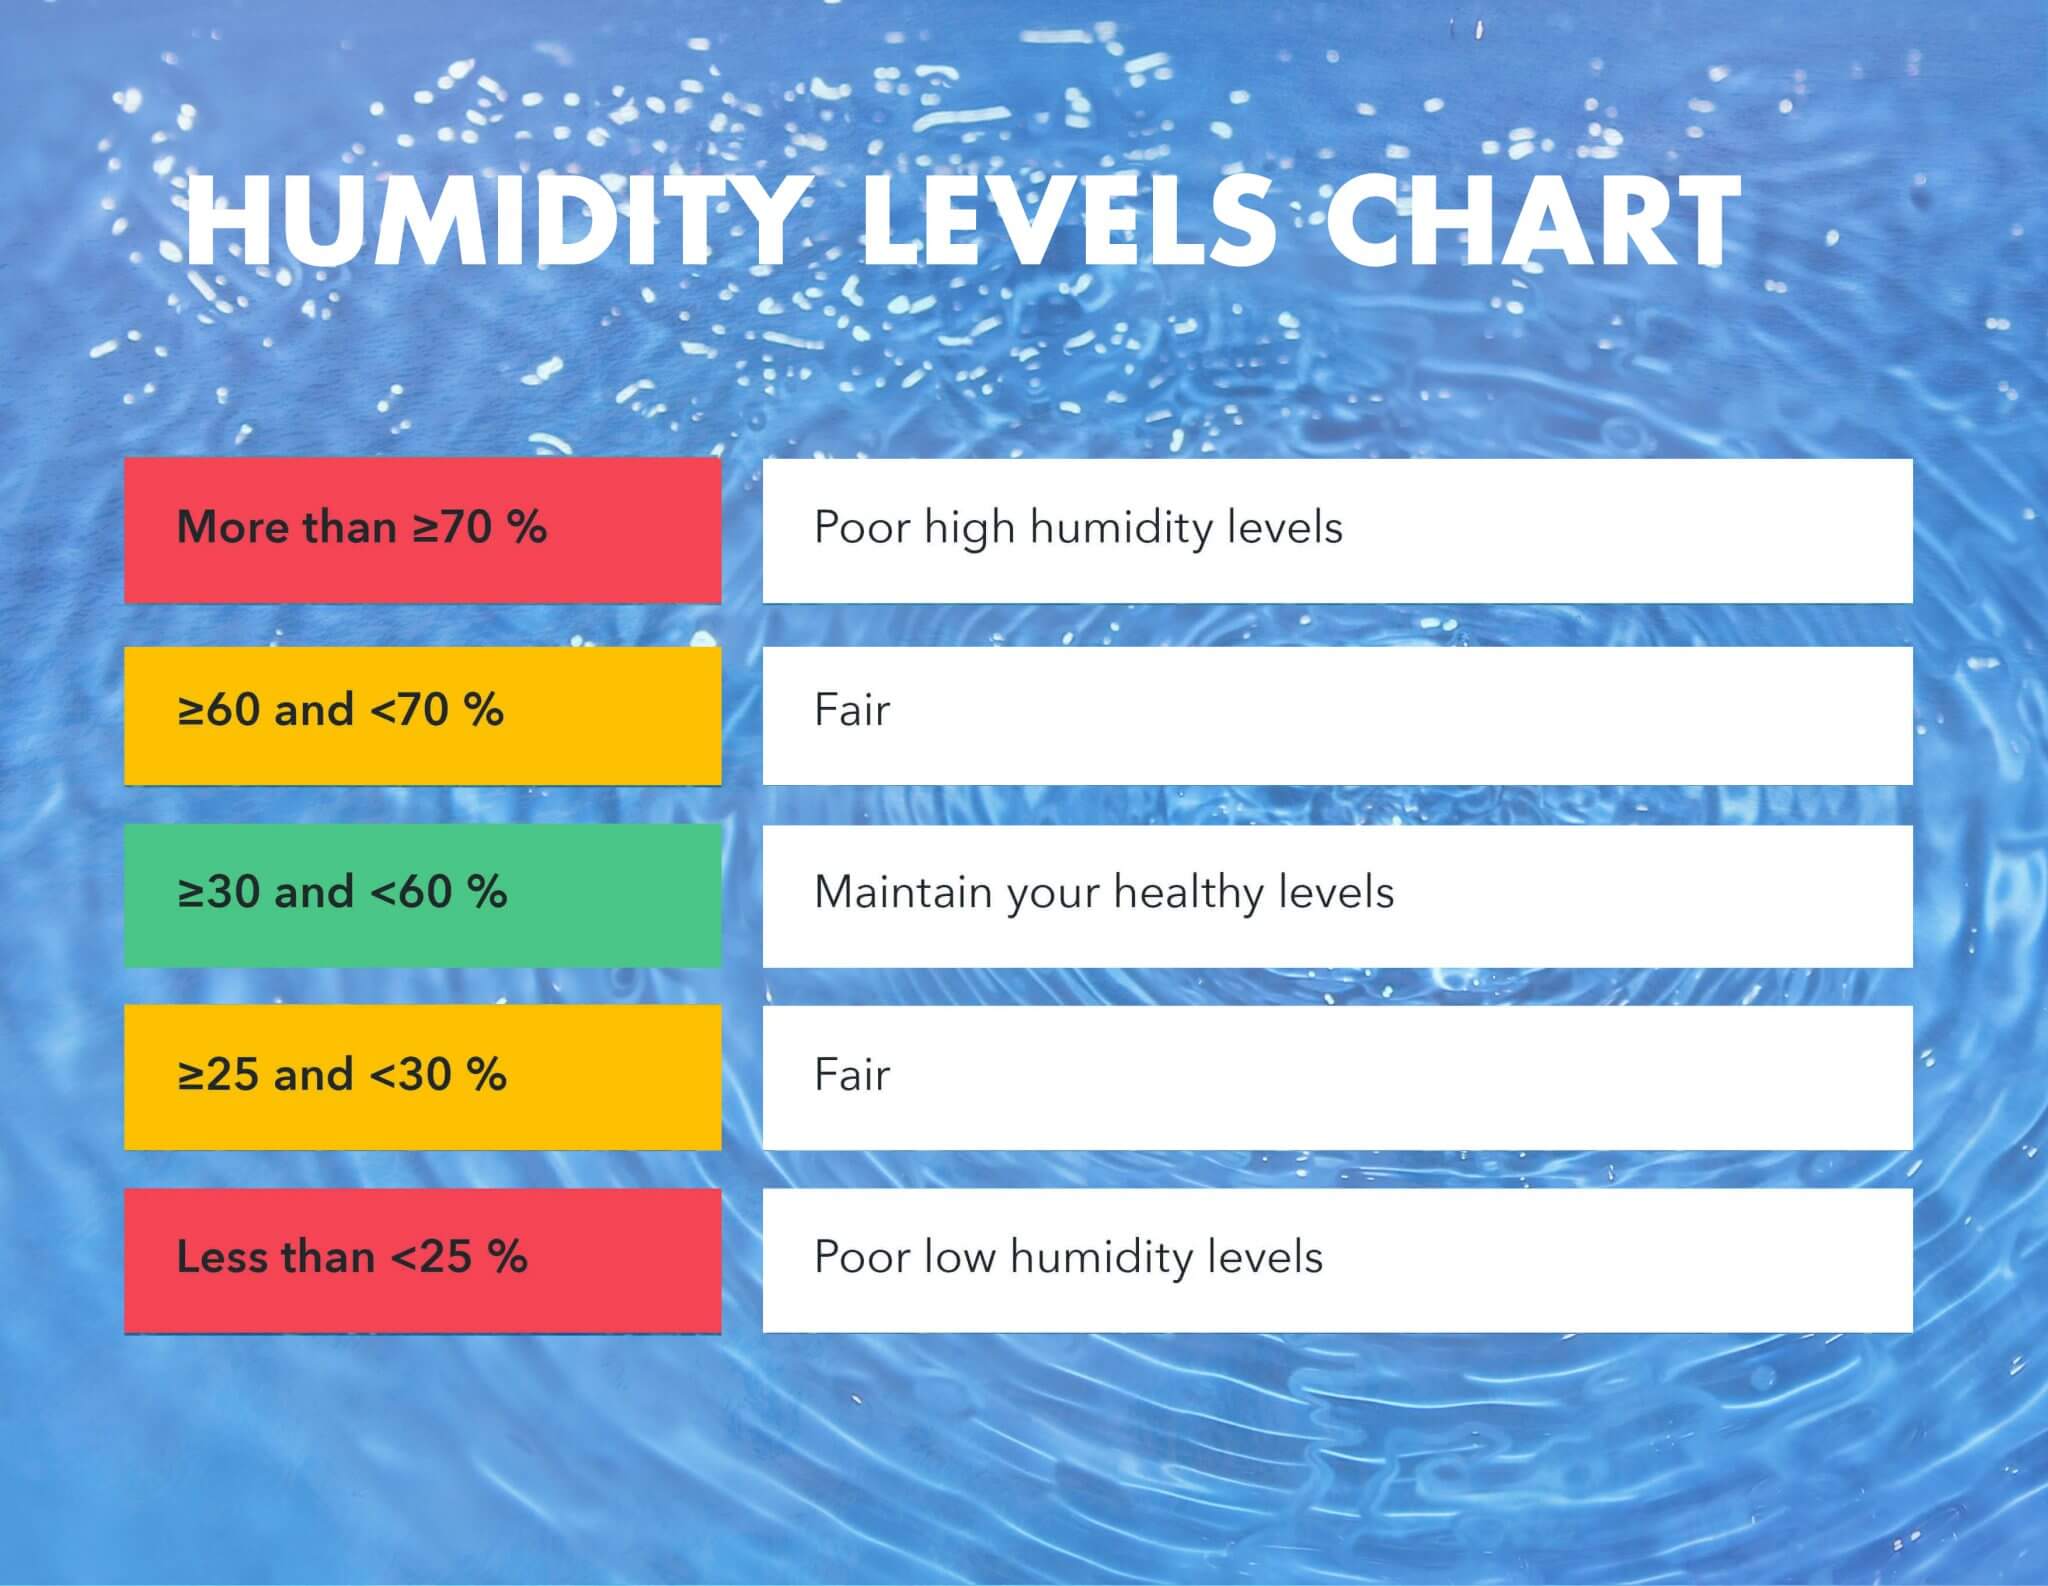 What's my home's humidity level – and why does it matter?